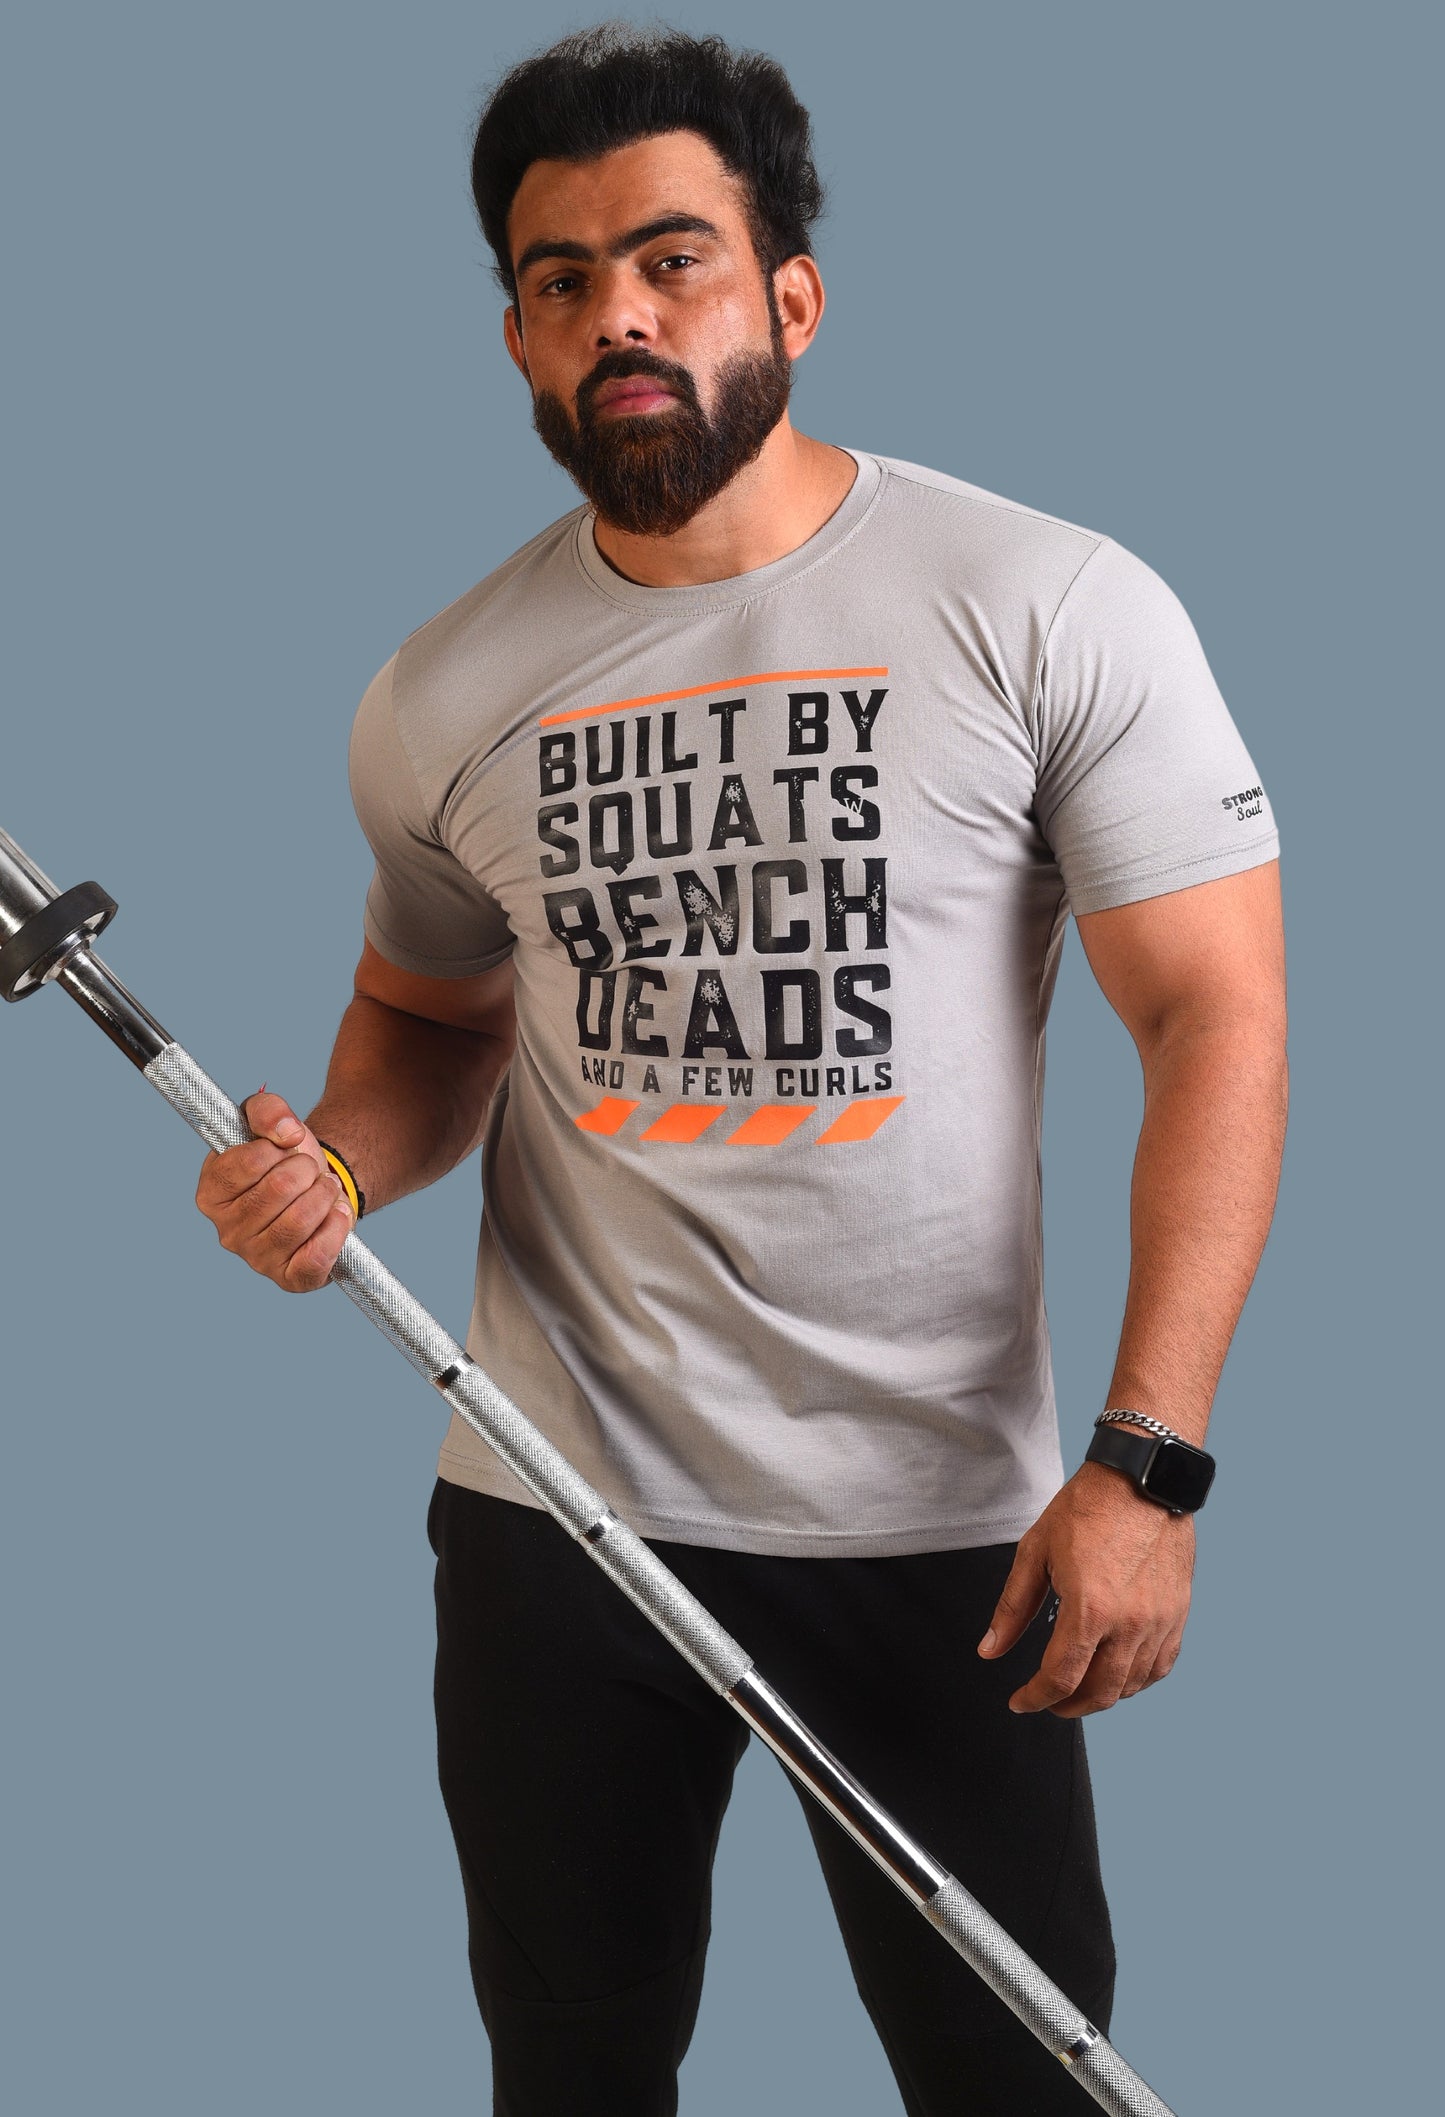 Gym T Shirt - Built By Squats Bench Deads And A Few Curls - Men T-Shirt with premium cotton Lycra. The Sports T Shirt by Strong Soul